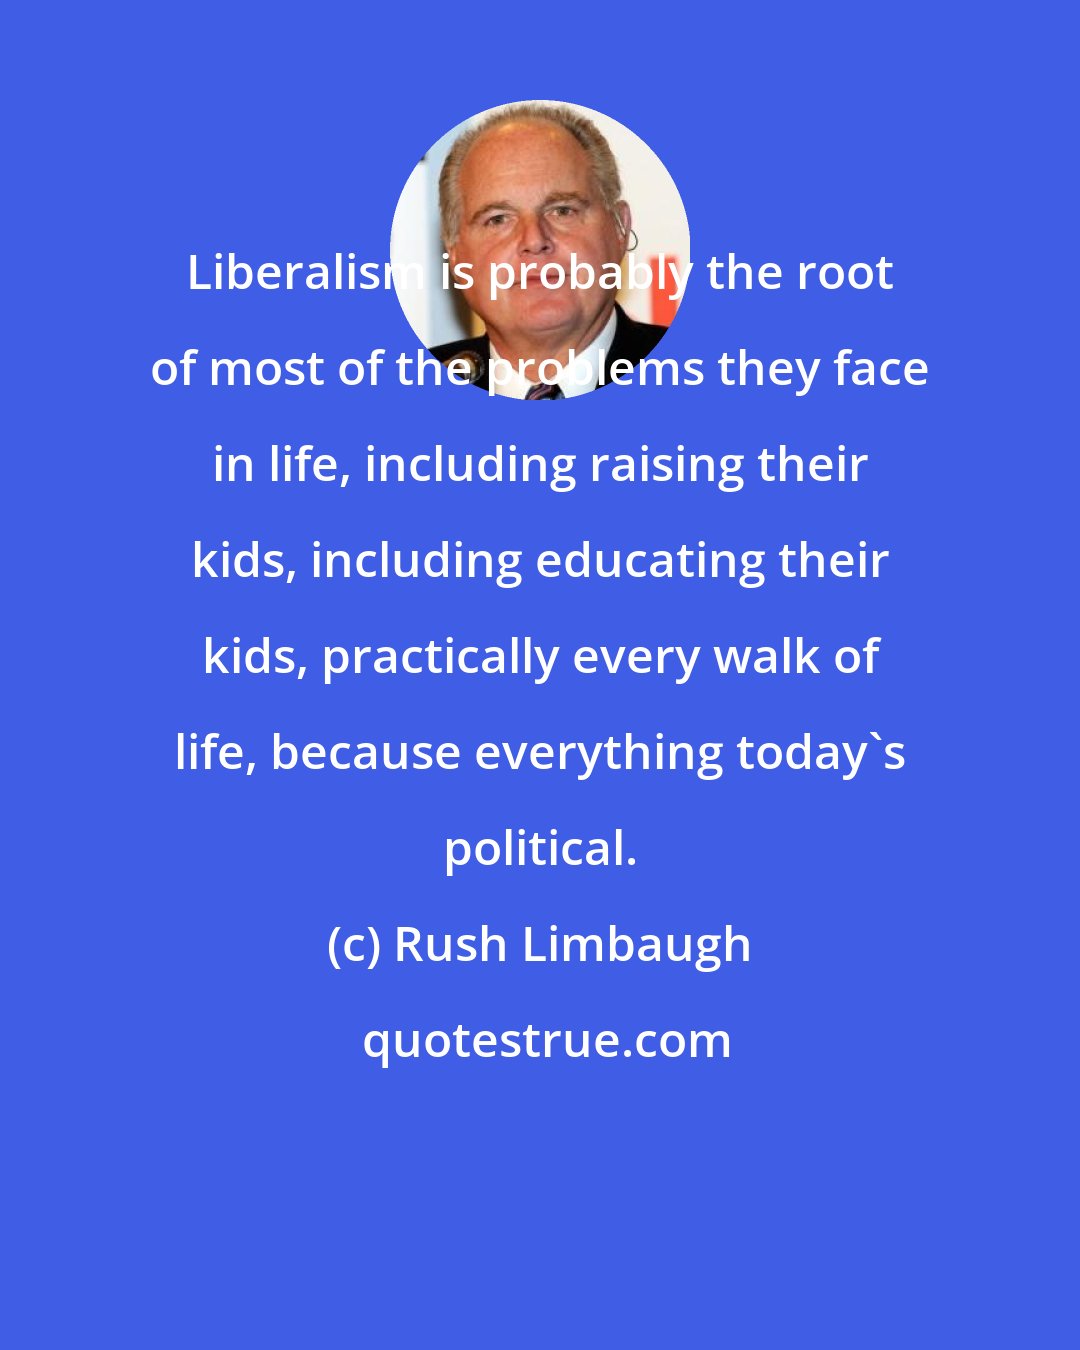 Rush Limbaugh: Liberalism is probably the root of most of the problems they face in life, including raising their kids, including educating their kids, practically every walk of life, because everything today's political.